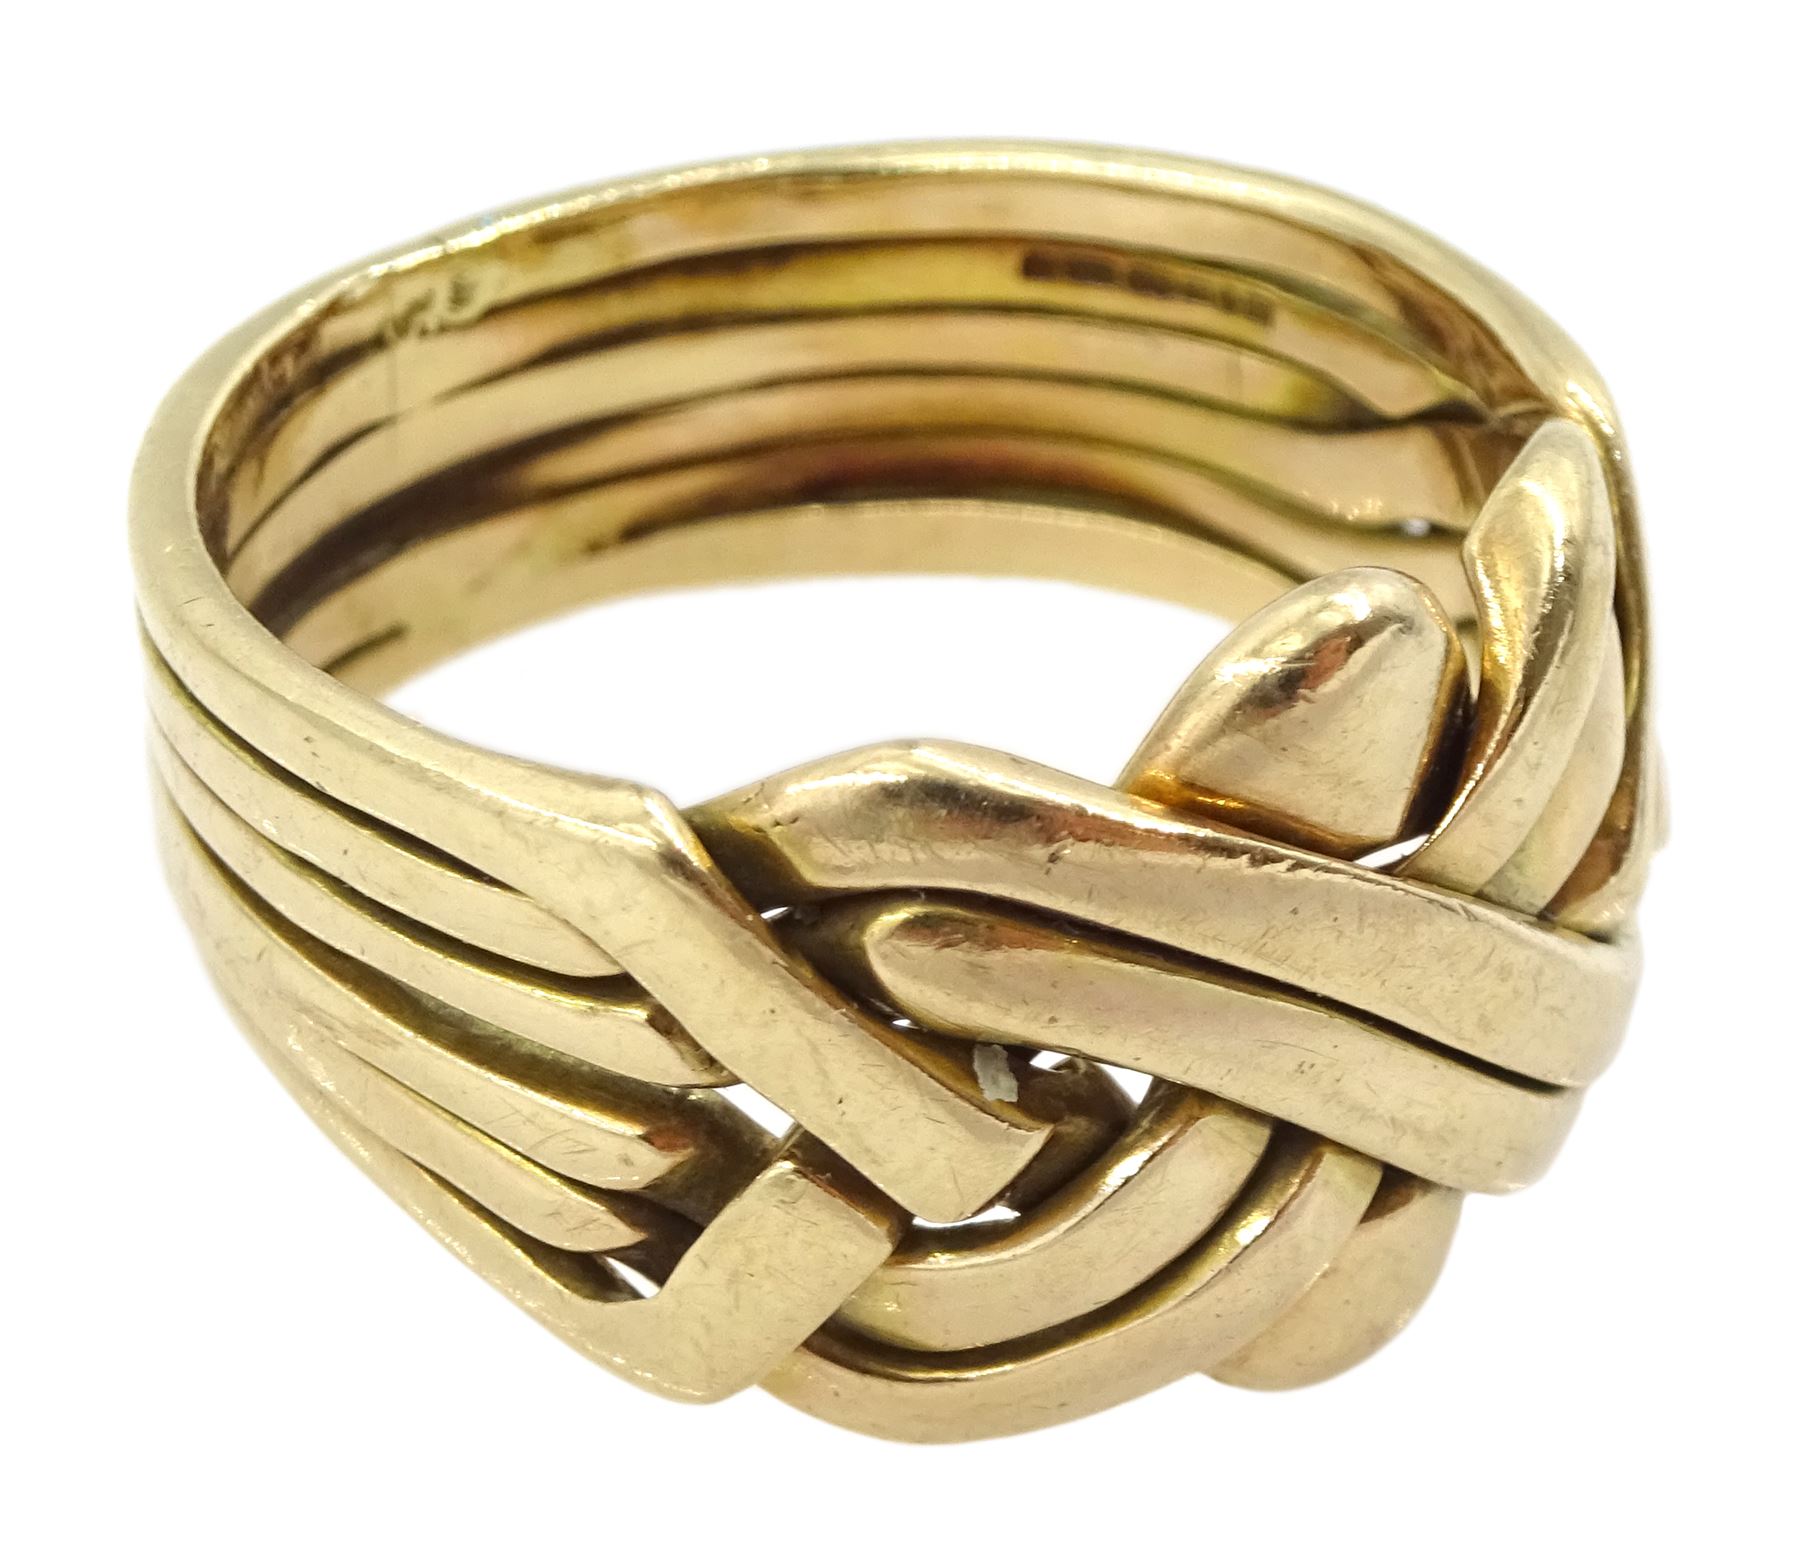 9ct gold puzzle ring - Image 3 of 4